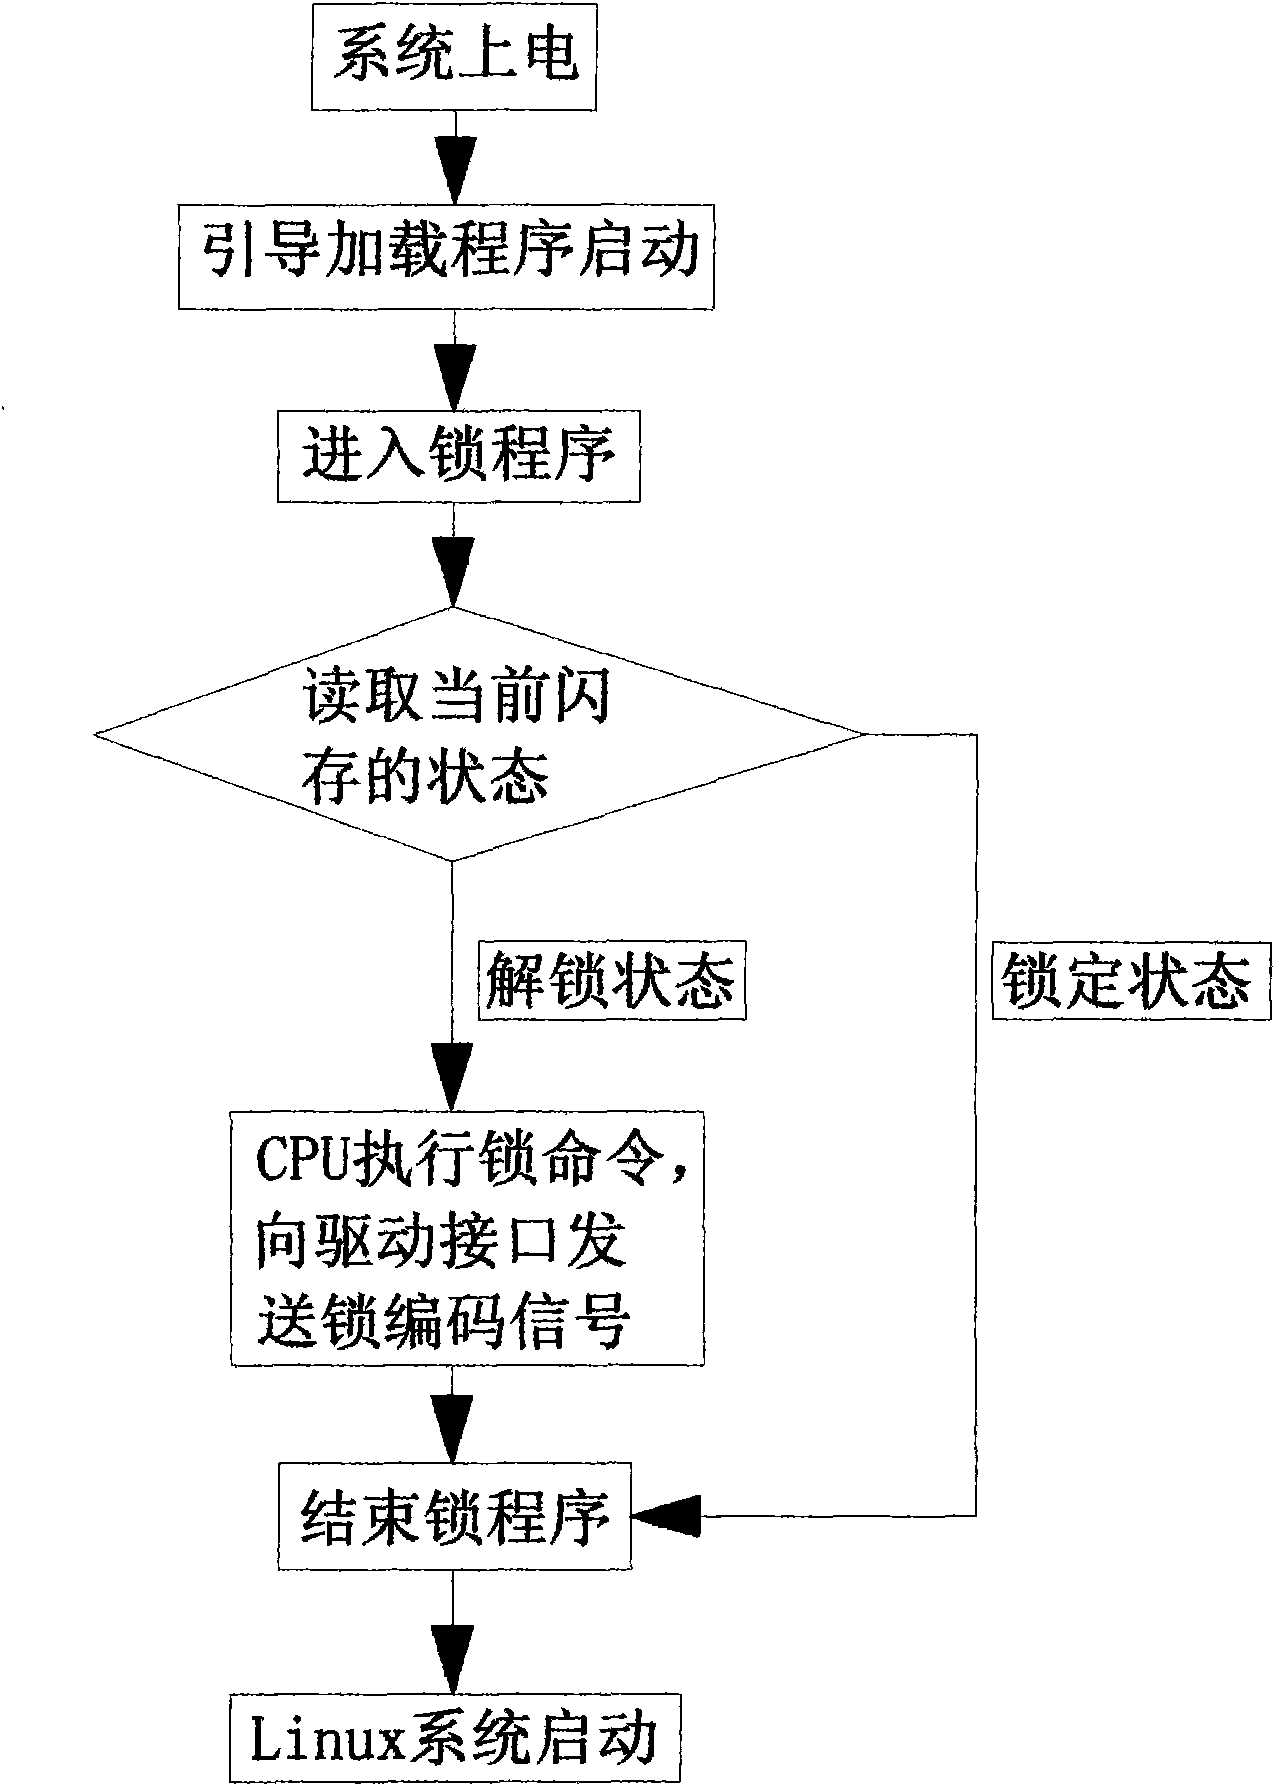 Embedded system-based method for protecting security and integrity of flash data